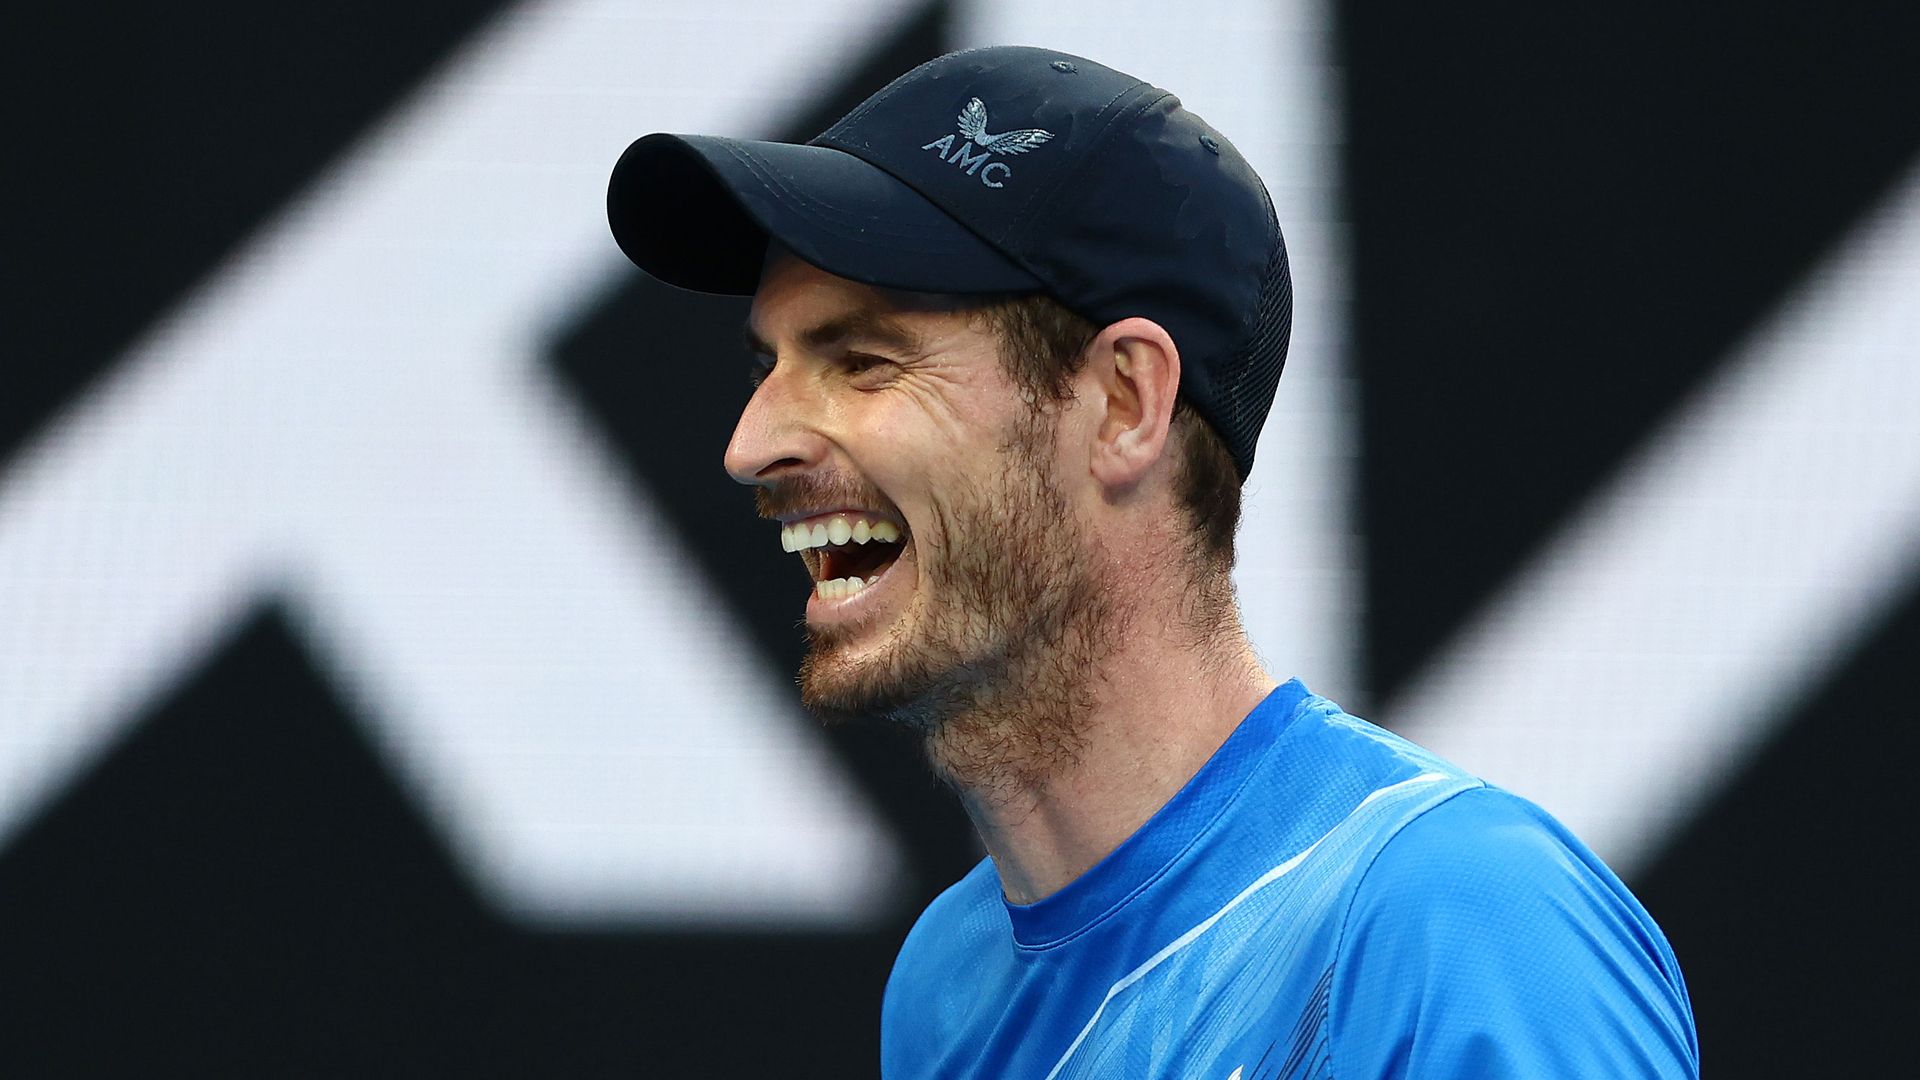 Andy Murray shares rare insight into parenthood after professional disappointment